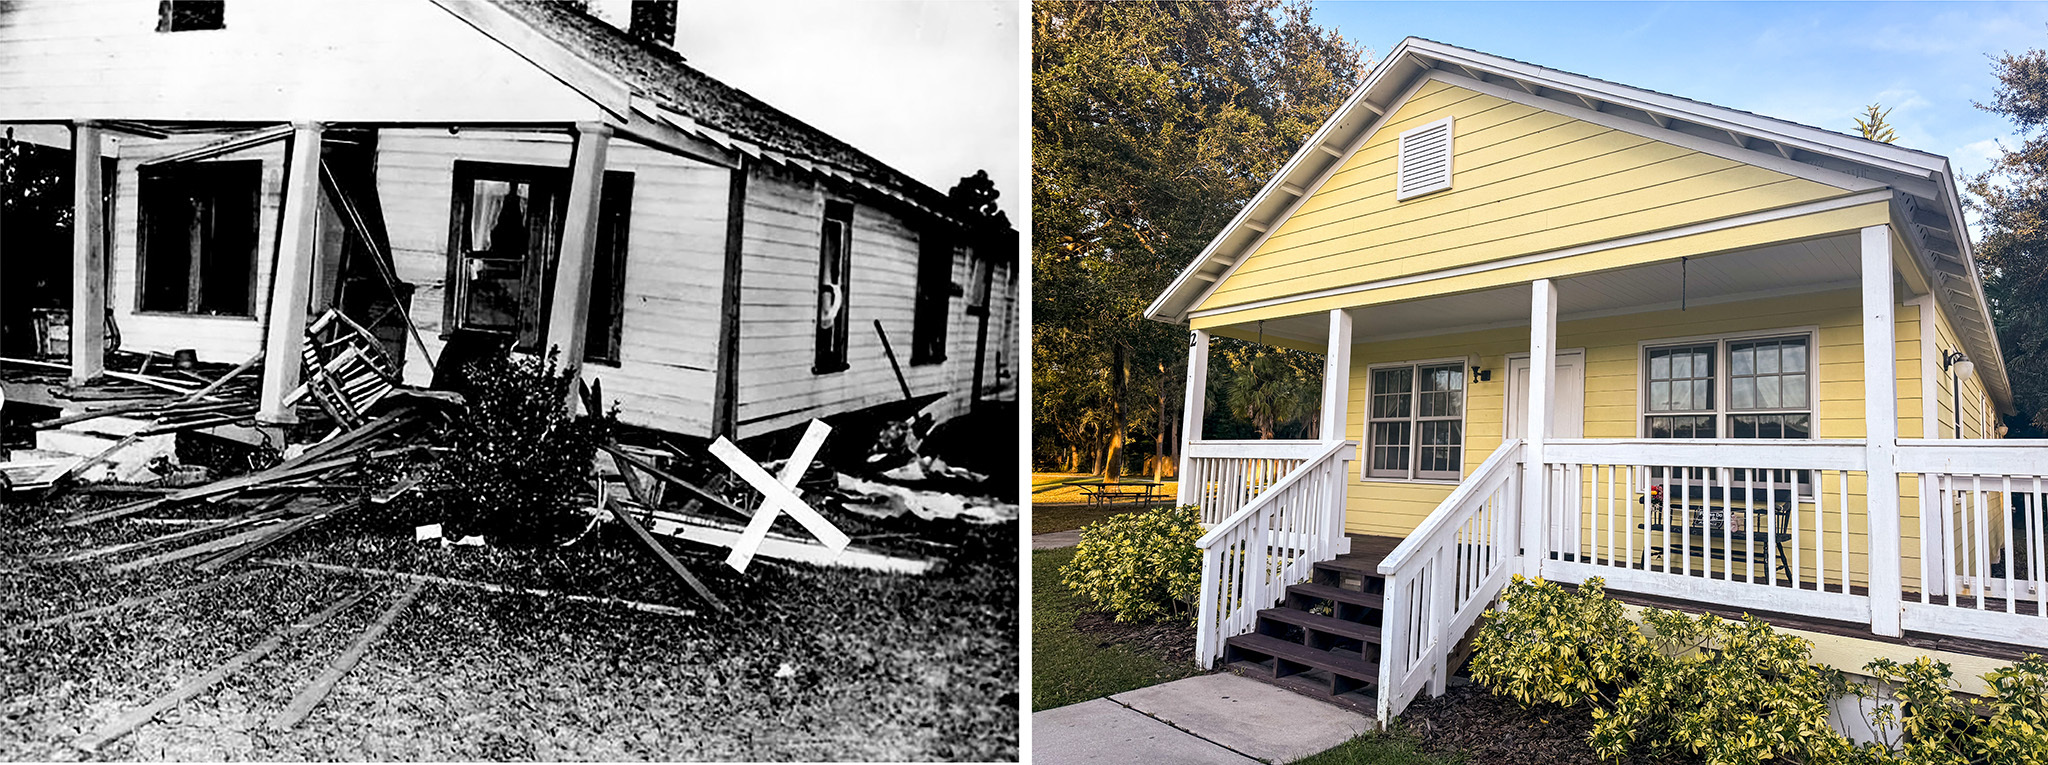 Left photo in black and white: a bombed house with wooden planks and furniture scattered across the lawn. The steps to the front door are caved in.<br />
Right photo in color: A yellow house in good condition. The steps and porch are restored with bushes lining the porch. 